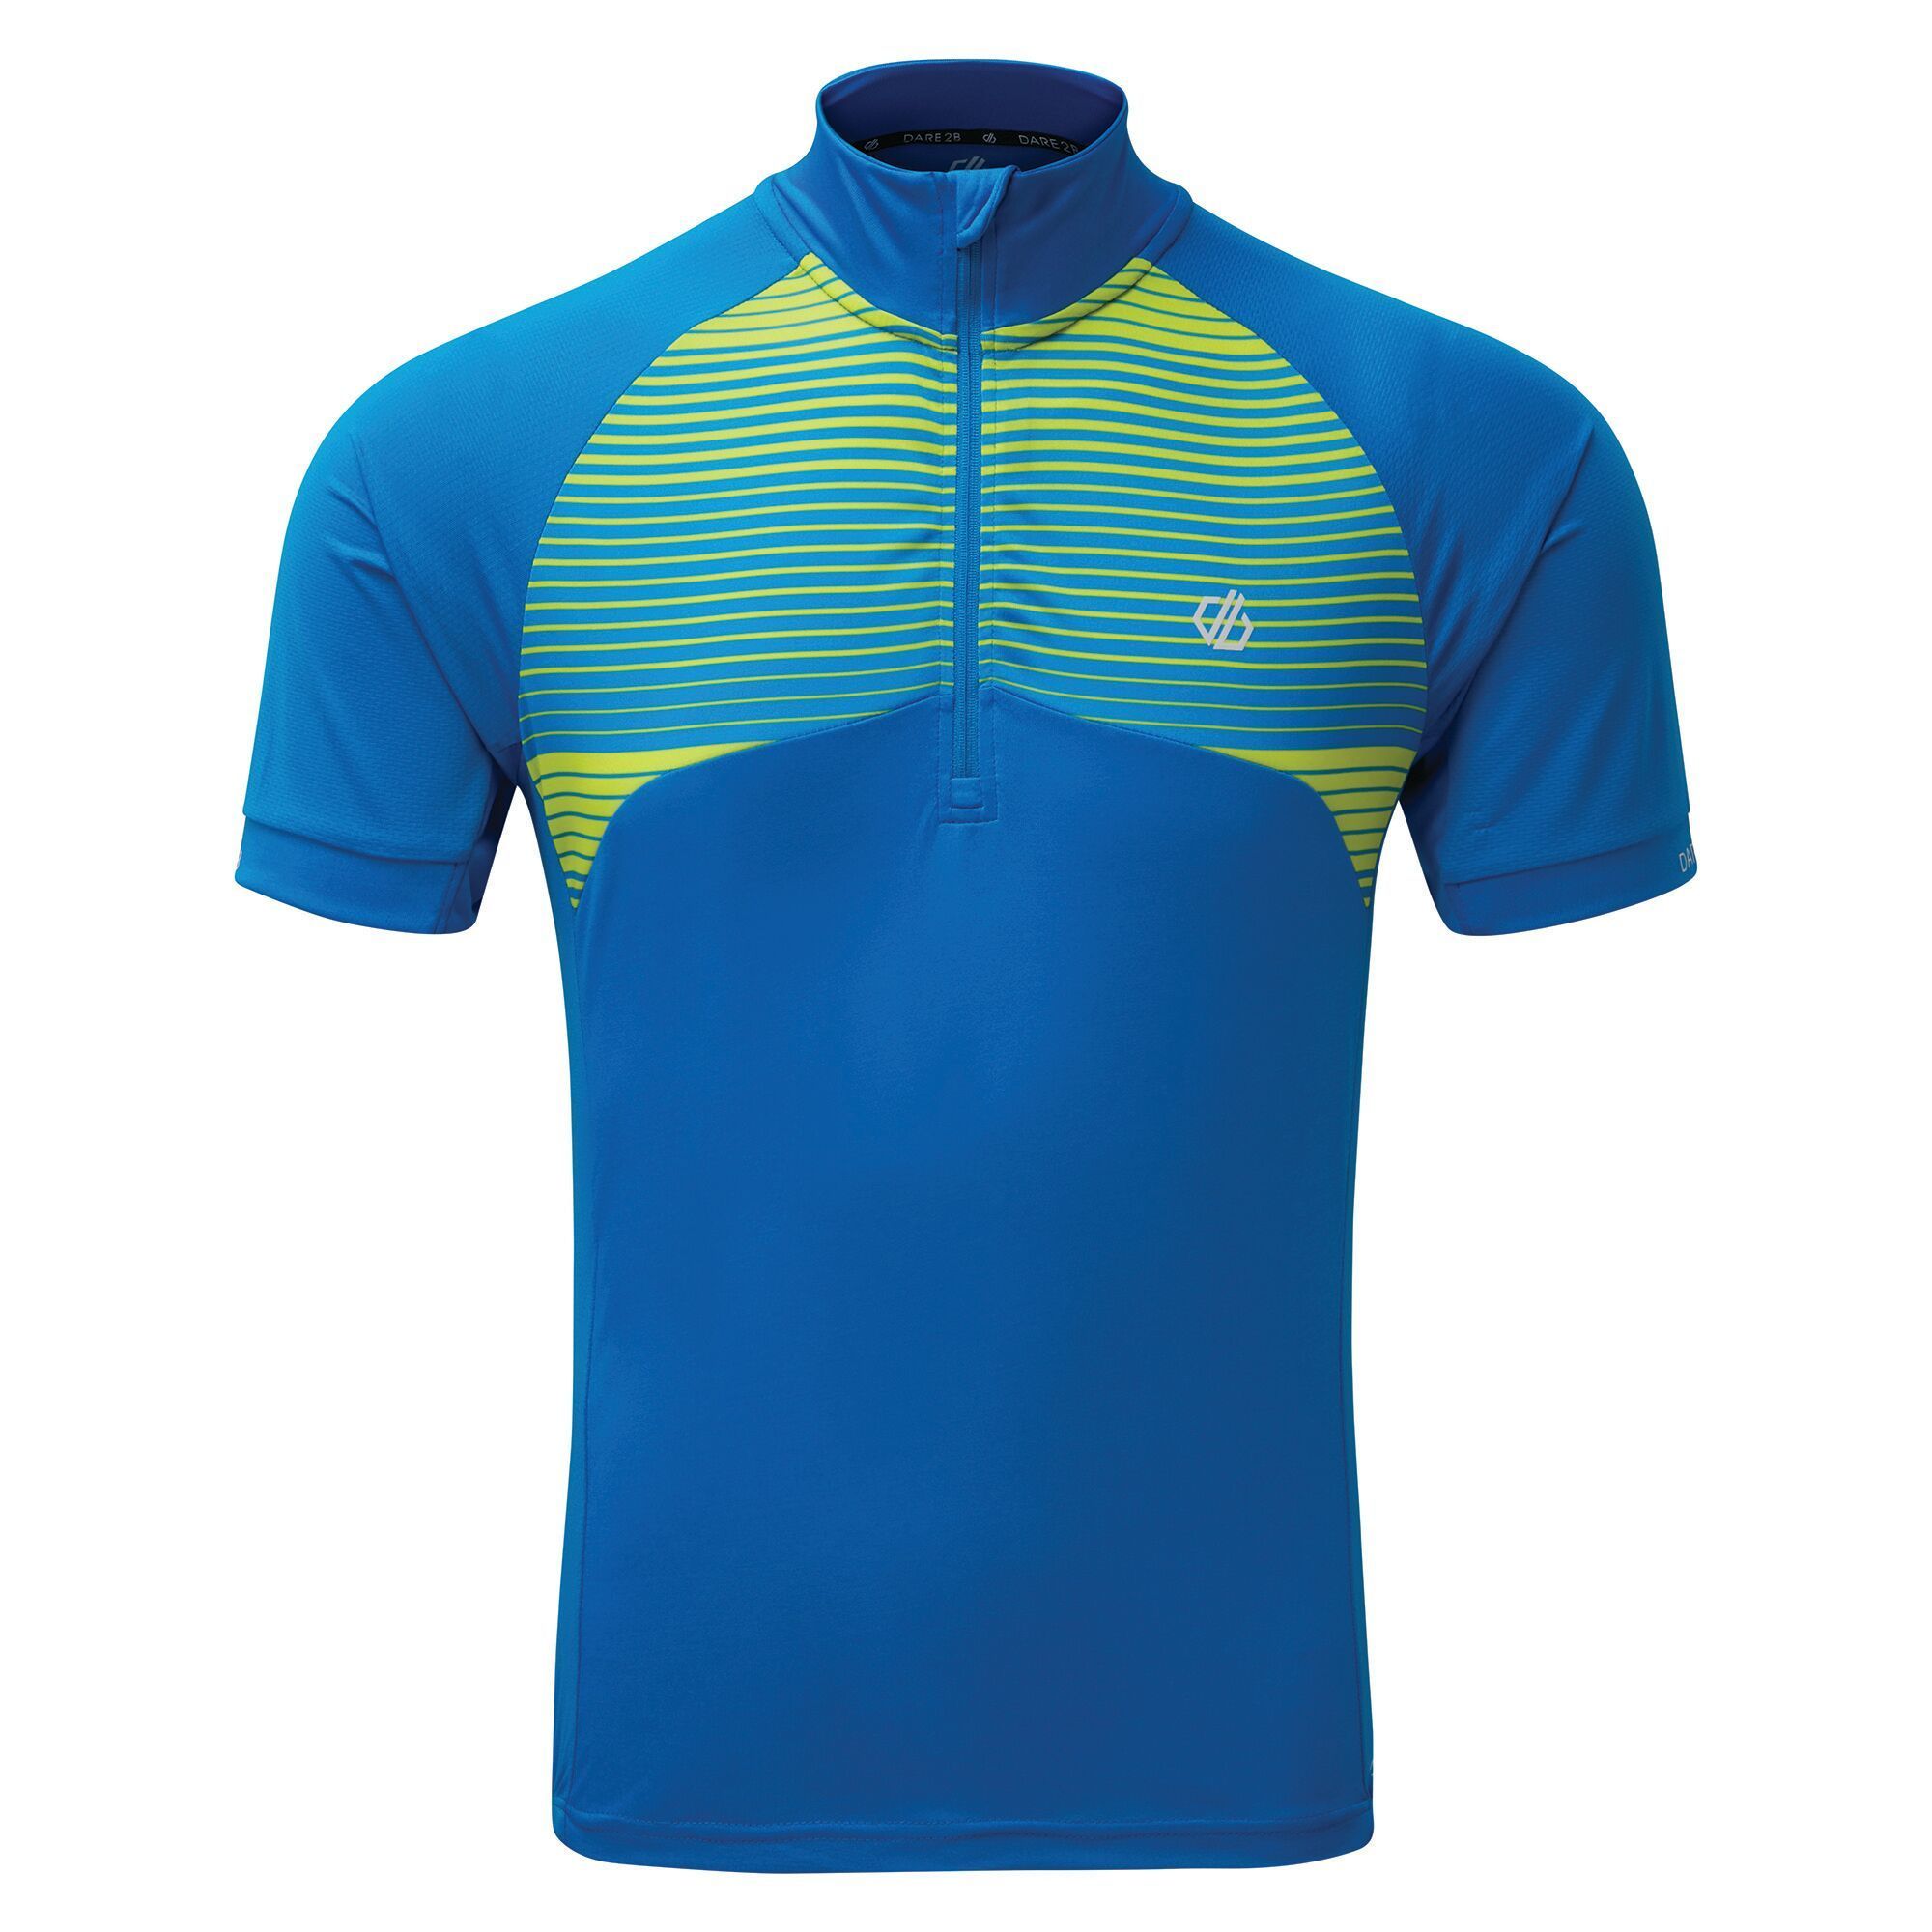 Material: 100% Polyester. Lightweight cycling jersey made from sweat-wicking Q-Wic tech-polyester with airflow mesh sleeves and side panels. Shaped collar and long back with scooped part elasticated hem. Anti-bacterial odour control treatment. 1/2 length centre front venting zip with autolock slider and inner zip guard. 3 compartment pockets at rear with zipped security pocket.